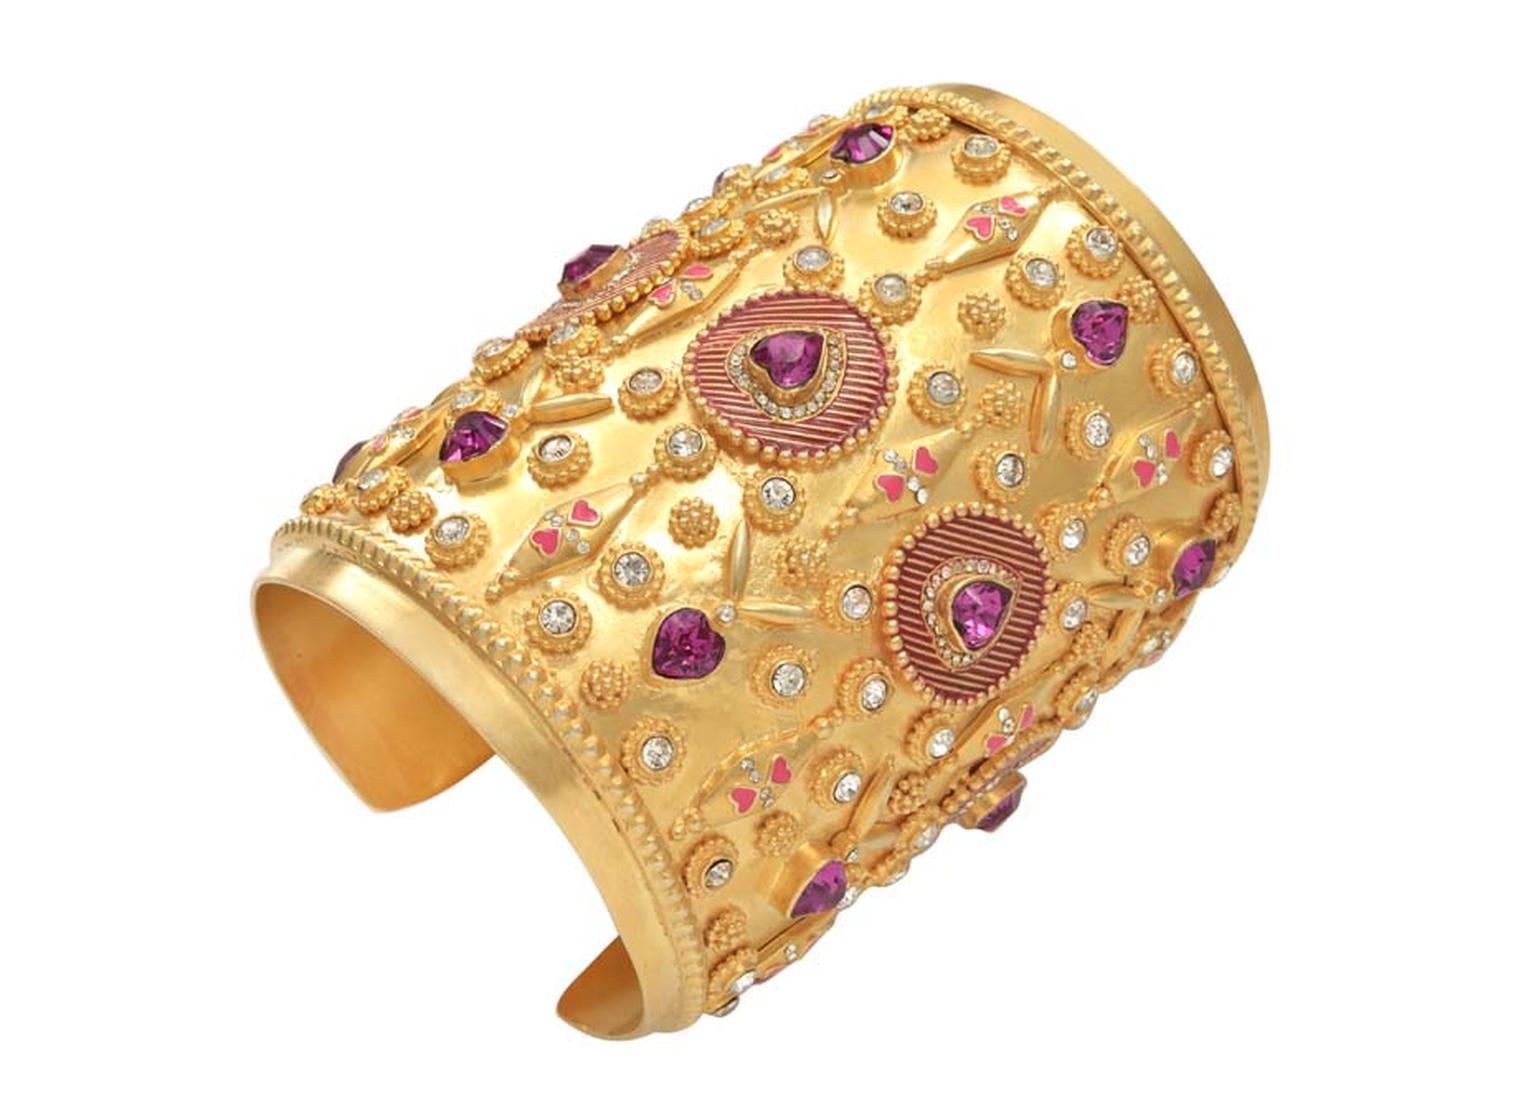 Manish Arora and Amrapali's Bola cuff from their latest AW 2014-15 collection.